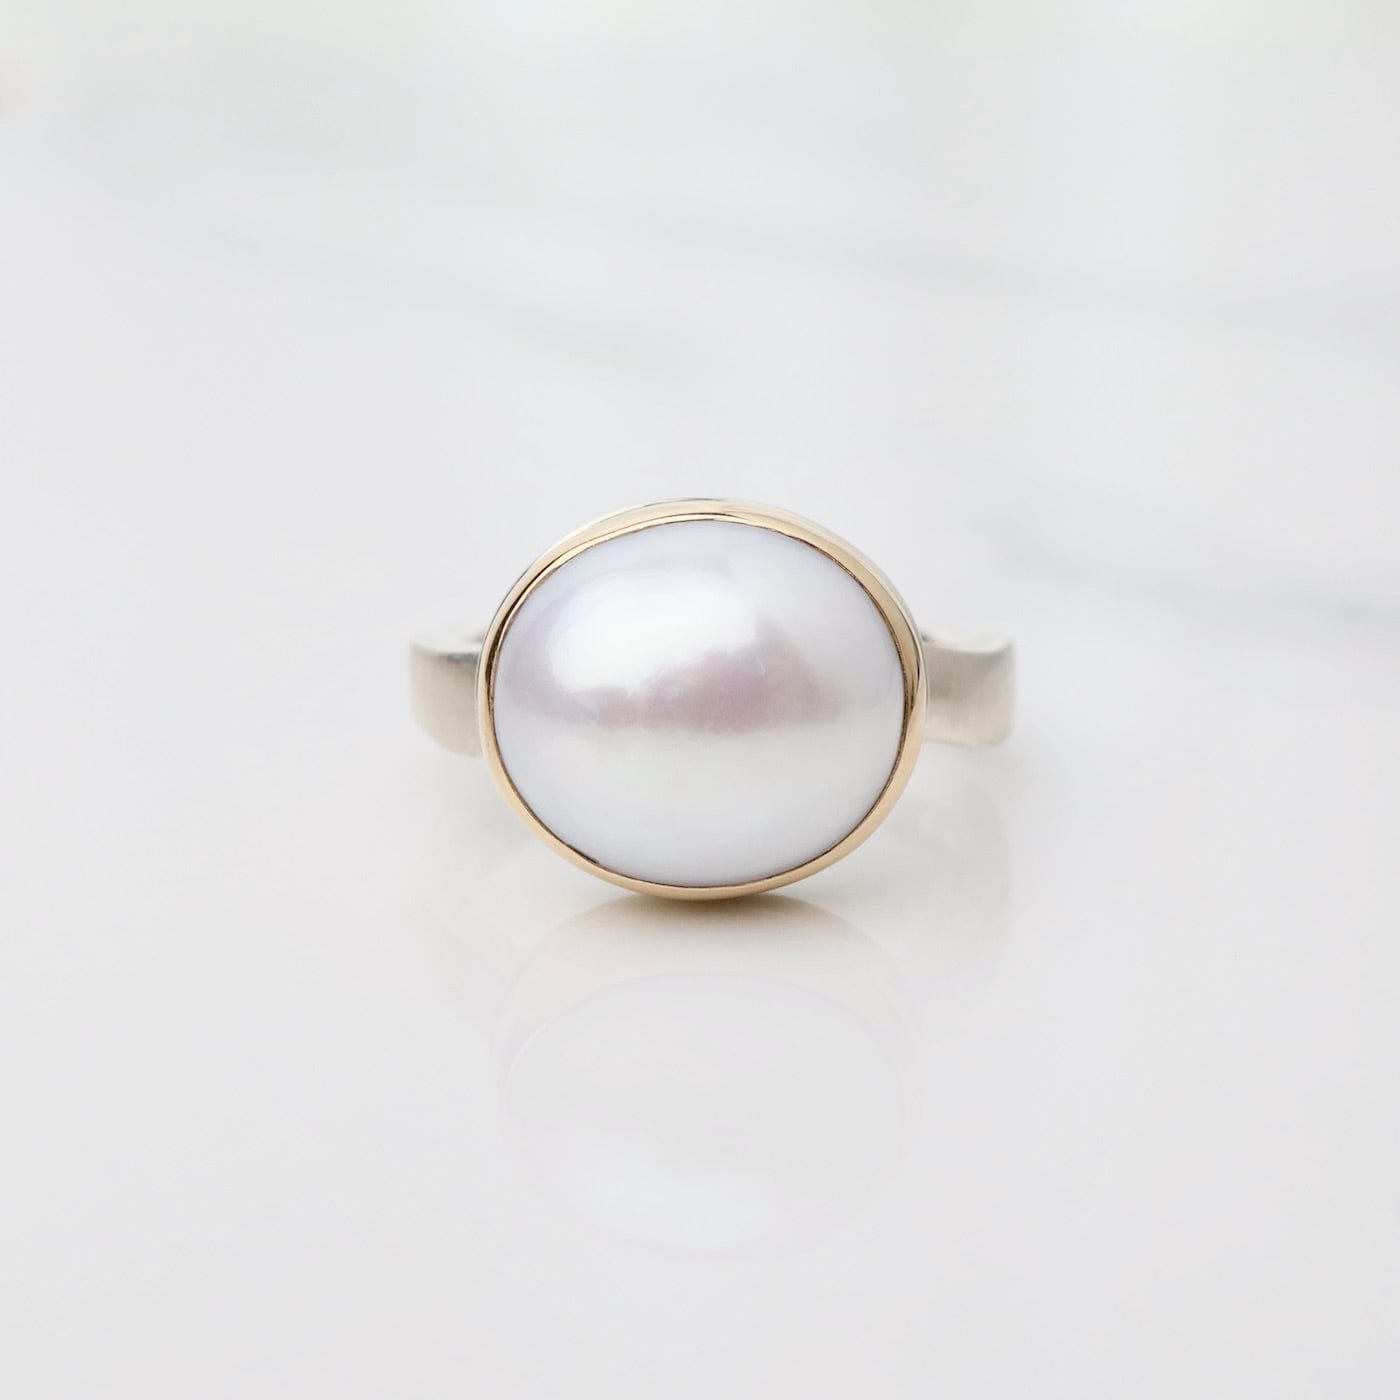 Gold Pearl Finger Ring/ Indian Pearl Ring/indian Wedding Jewelry/ Indian  Jewelry/ Gold Ring/ Moti Ring/guttapusalu Jewelry/pakistani Jewelry - Etsy  Hong Kong